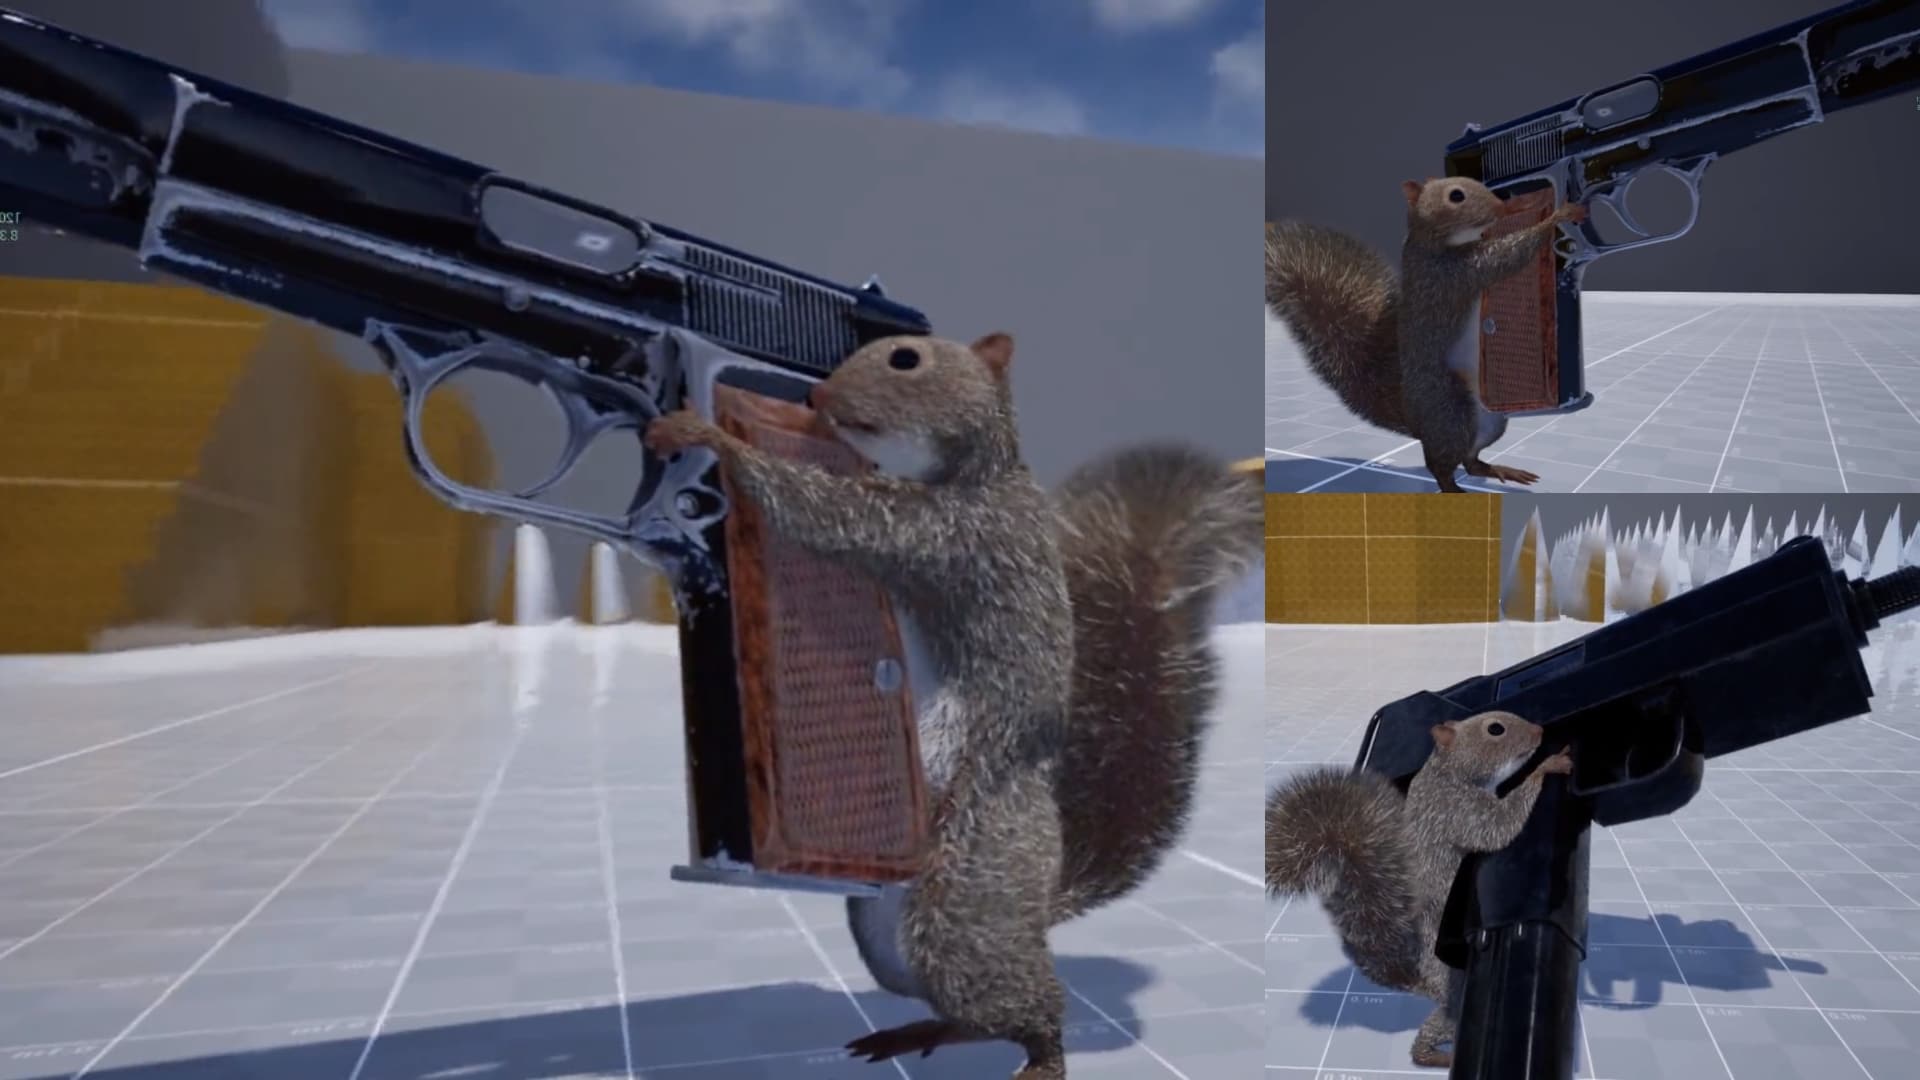 The-squirrel-Game-unreal-engine-5-game-GamersRD